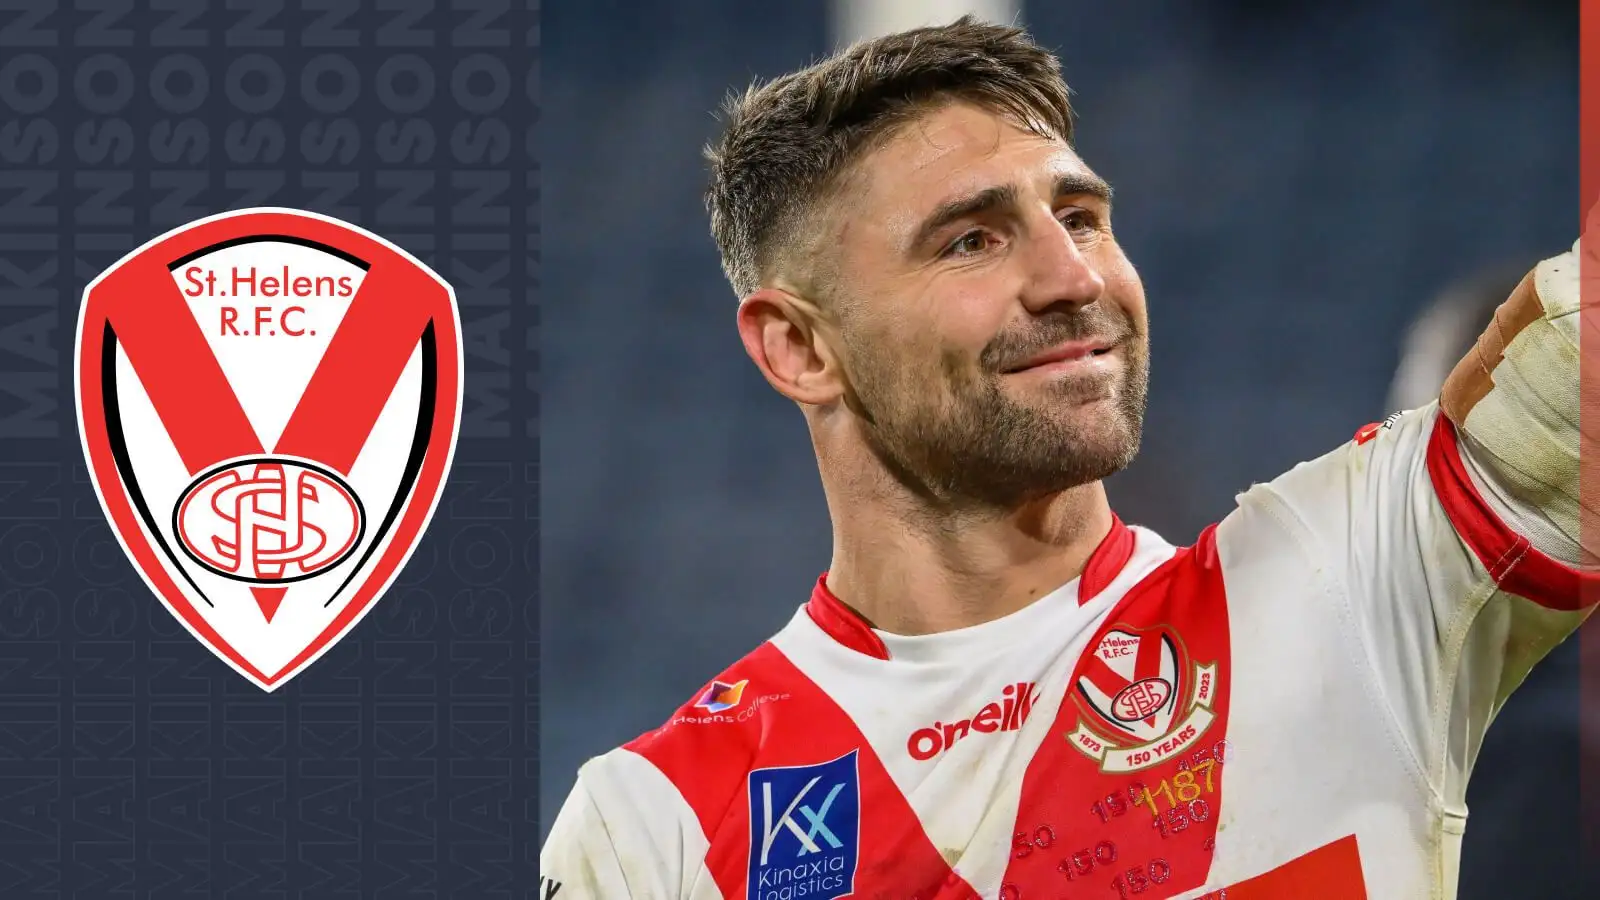 St Helens exclusive: Tommy Makinson on moving on from four-peat, finding new motivation and chasing success